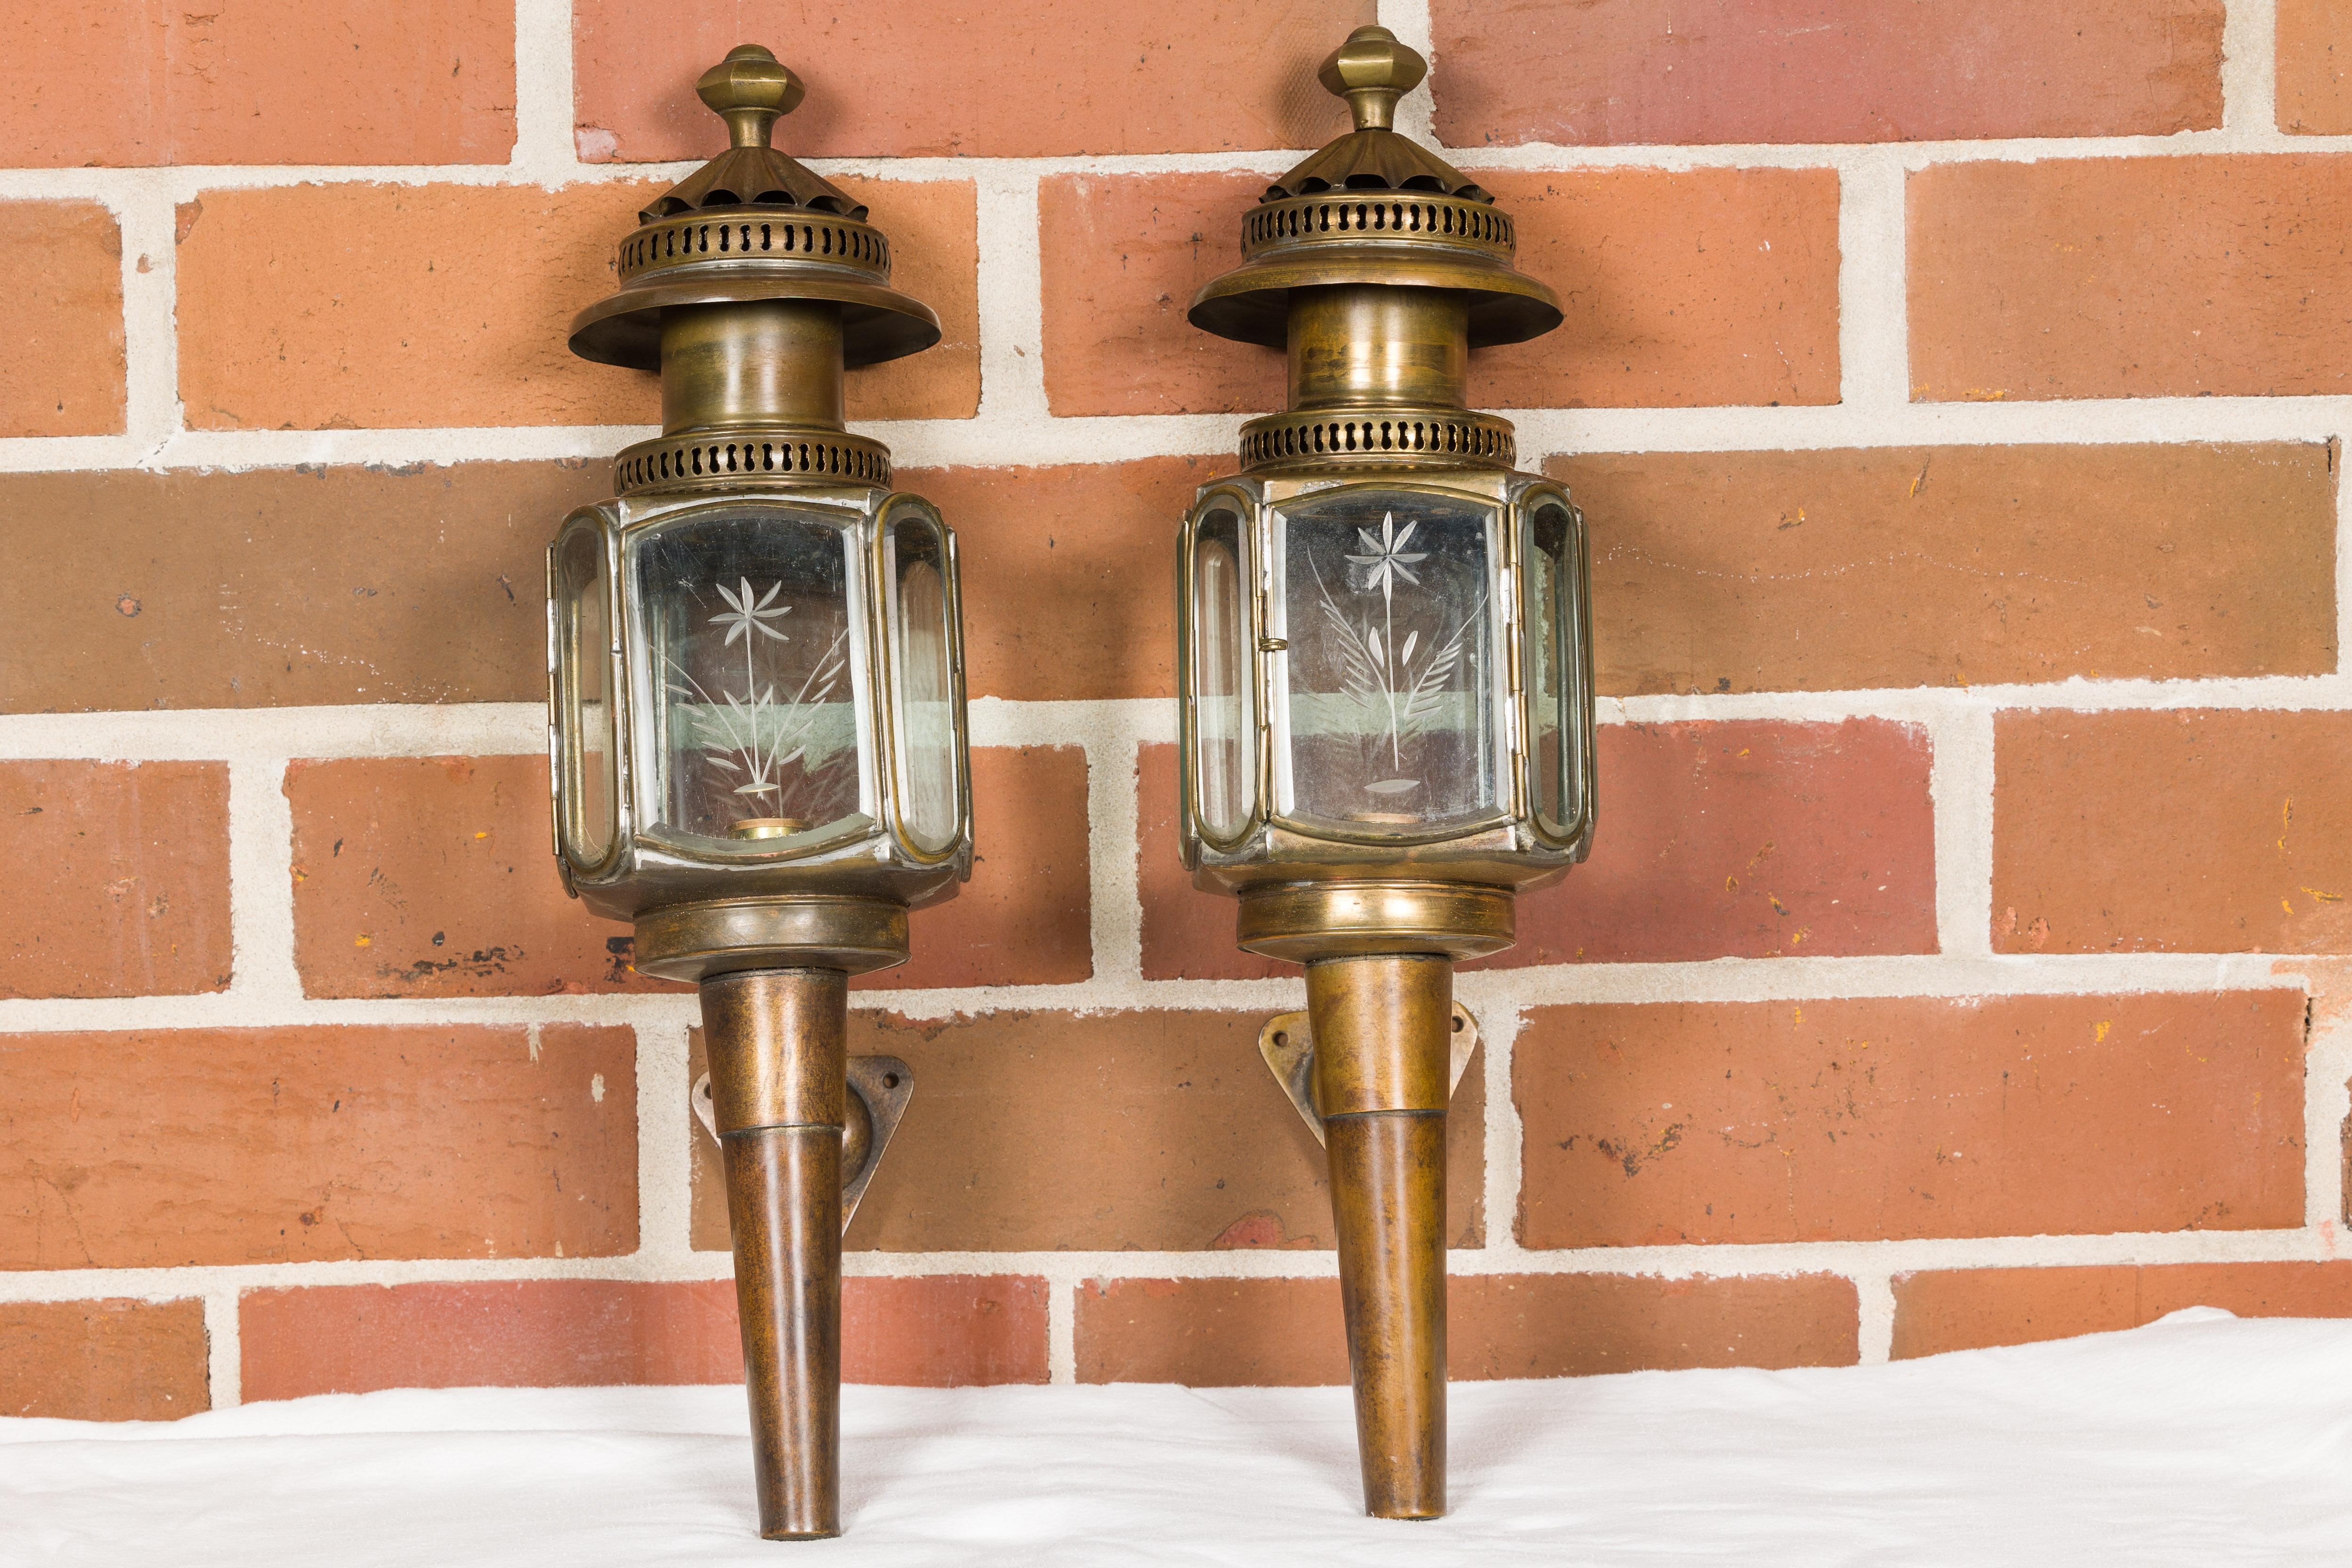 A pair of American Turn of the Century wall lanterns from circa 1900 with etched glass panels. Enrich your home's exterior with the captivating elegance of this pair of American Turn of the Century wall lanterns, circa 1900. Their graceful